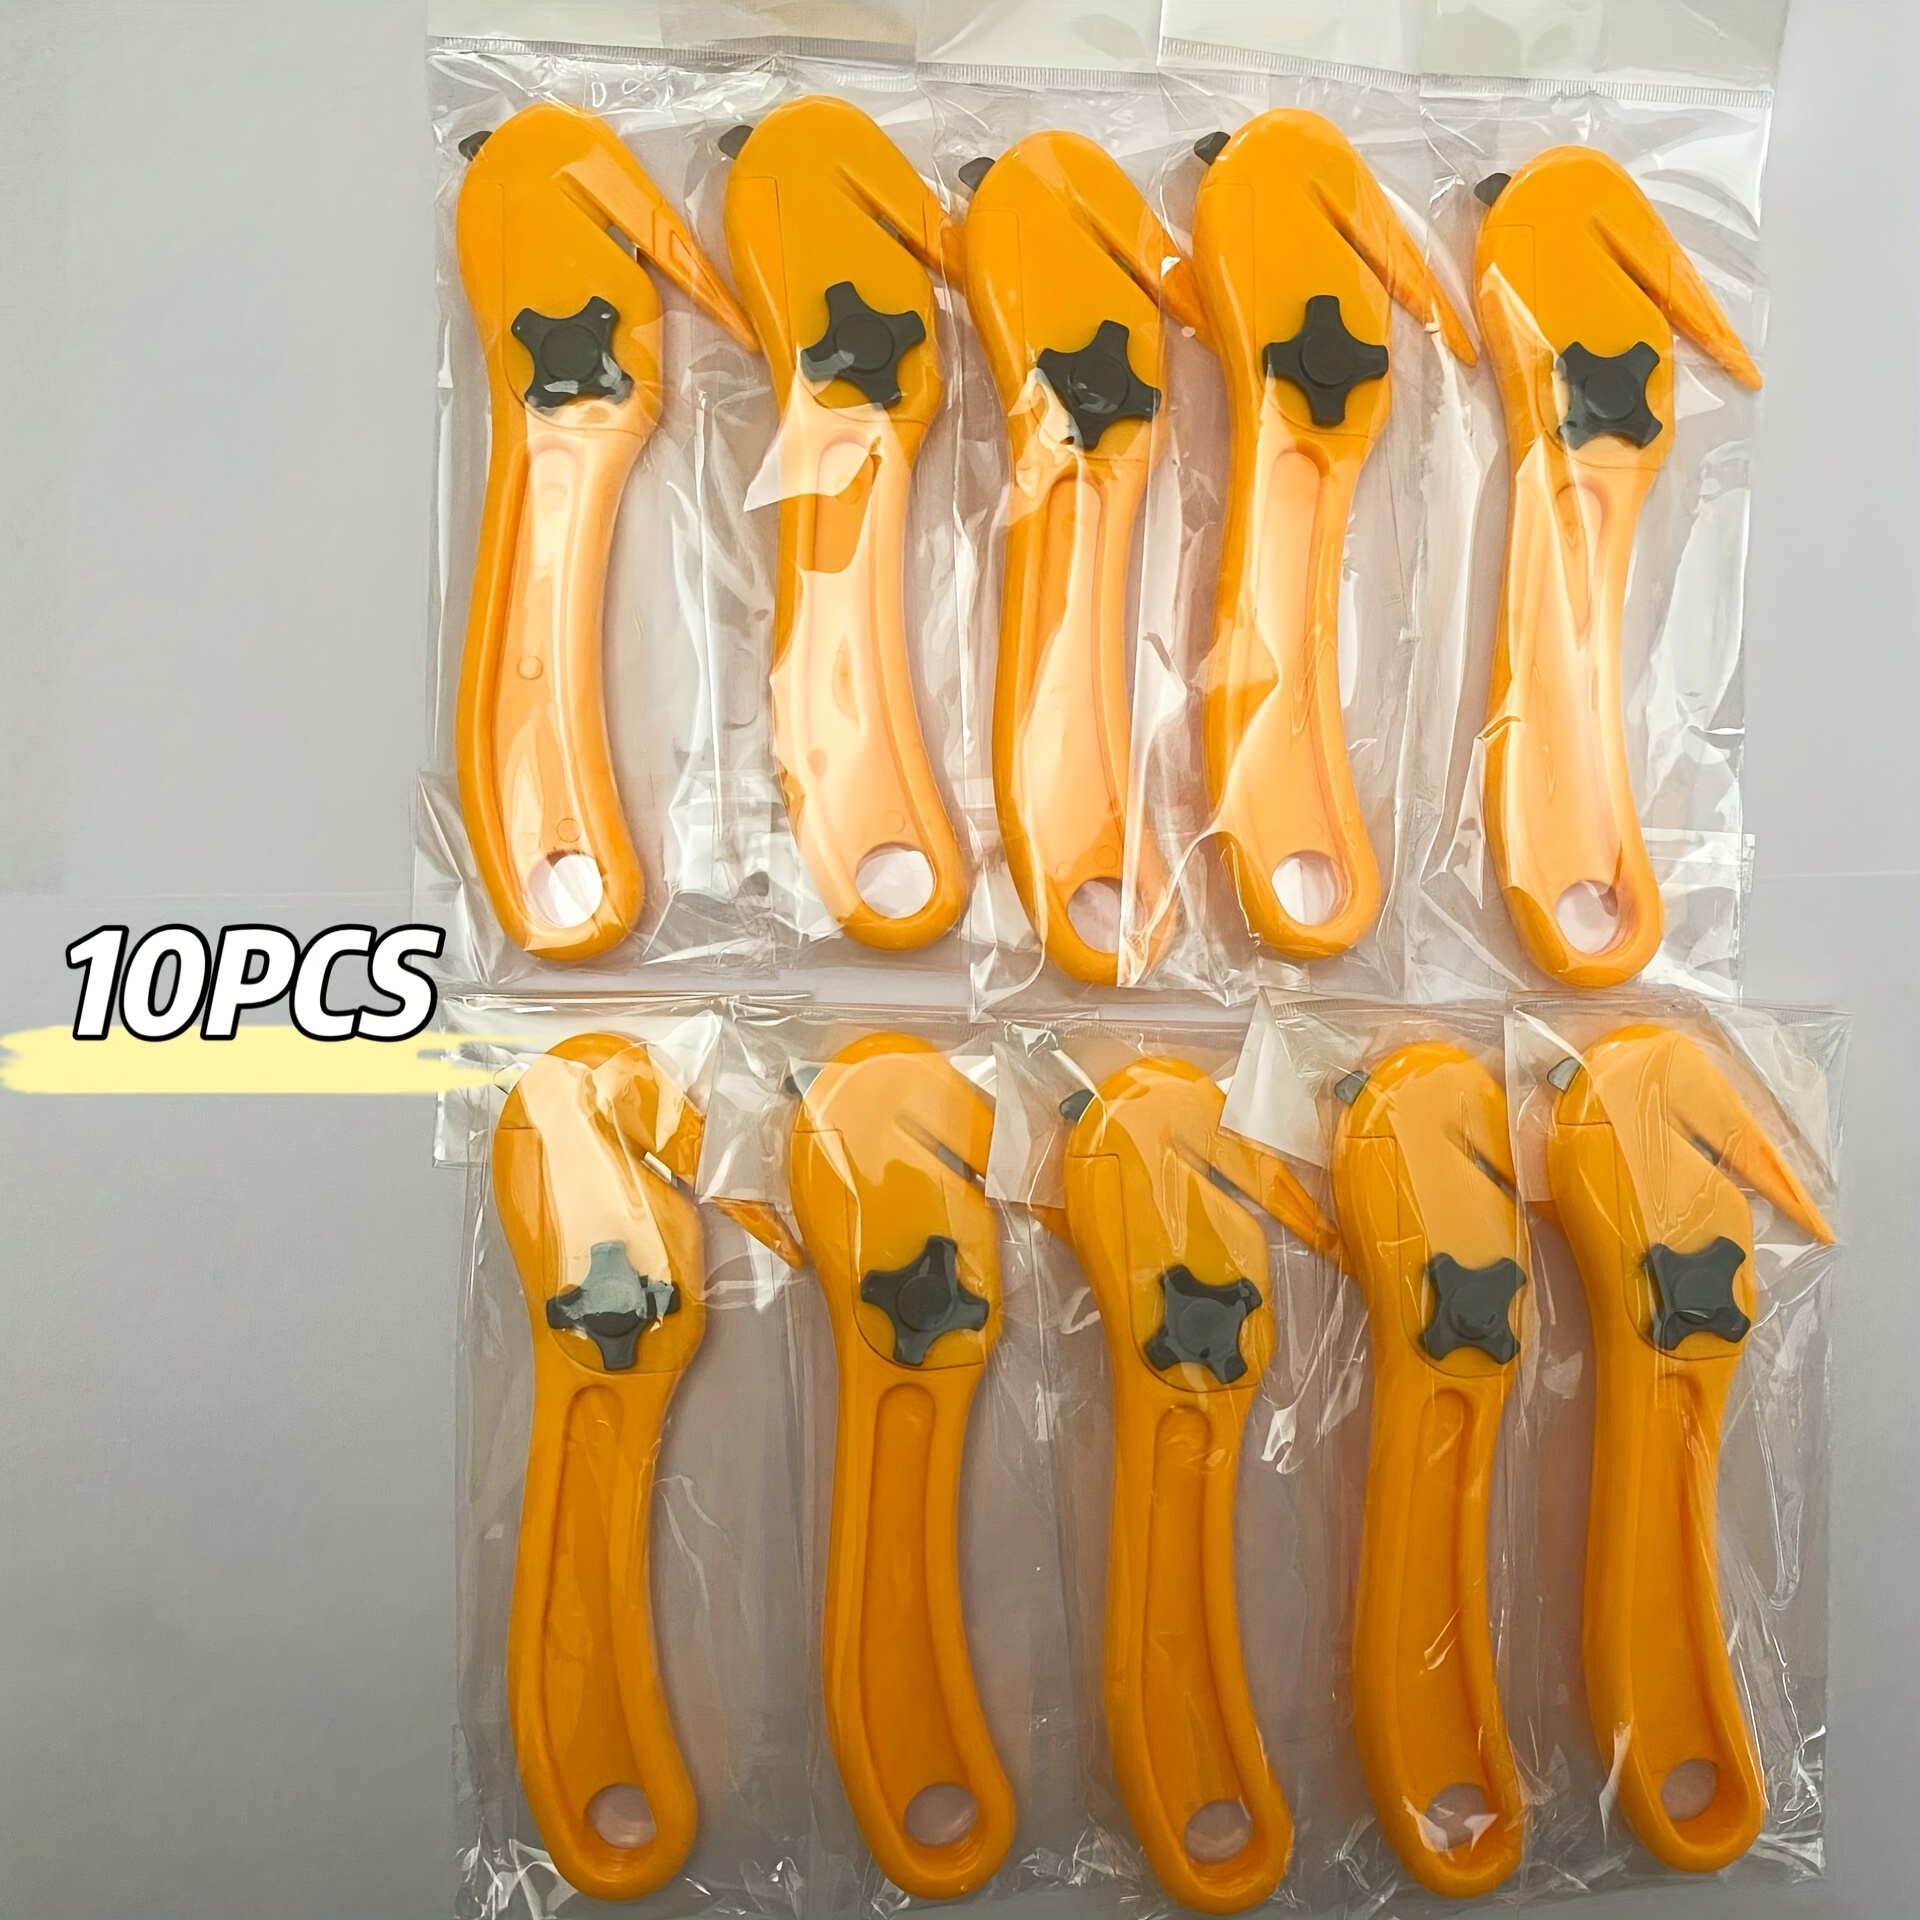 Good Quality ABS Plastic Safety Hook Cutter Knife Box Opener - Buy Good  Quality ABS Plastic Safety Hook Cutter Knife Box Opener Product on